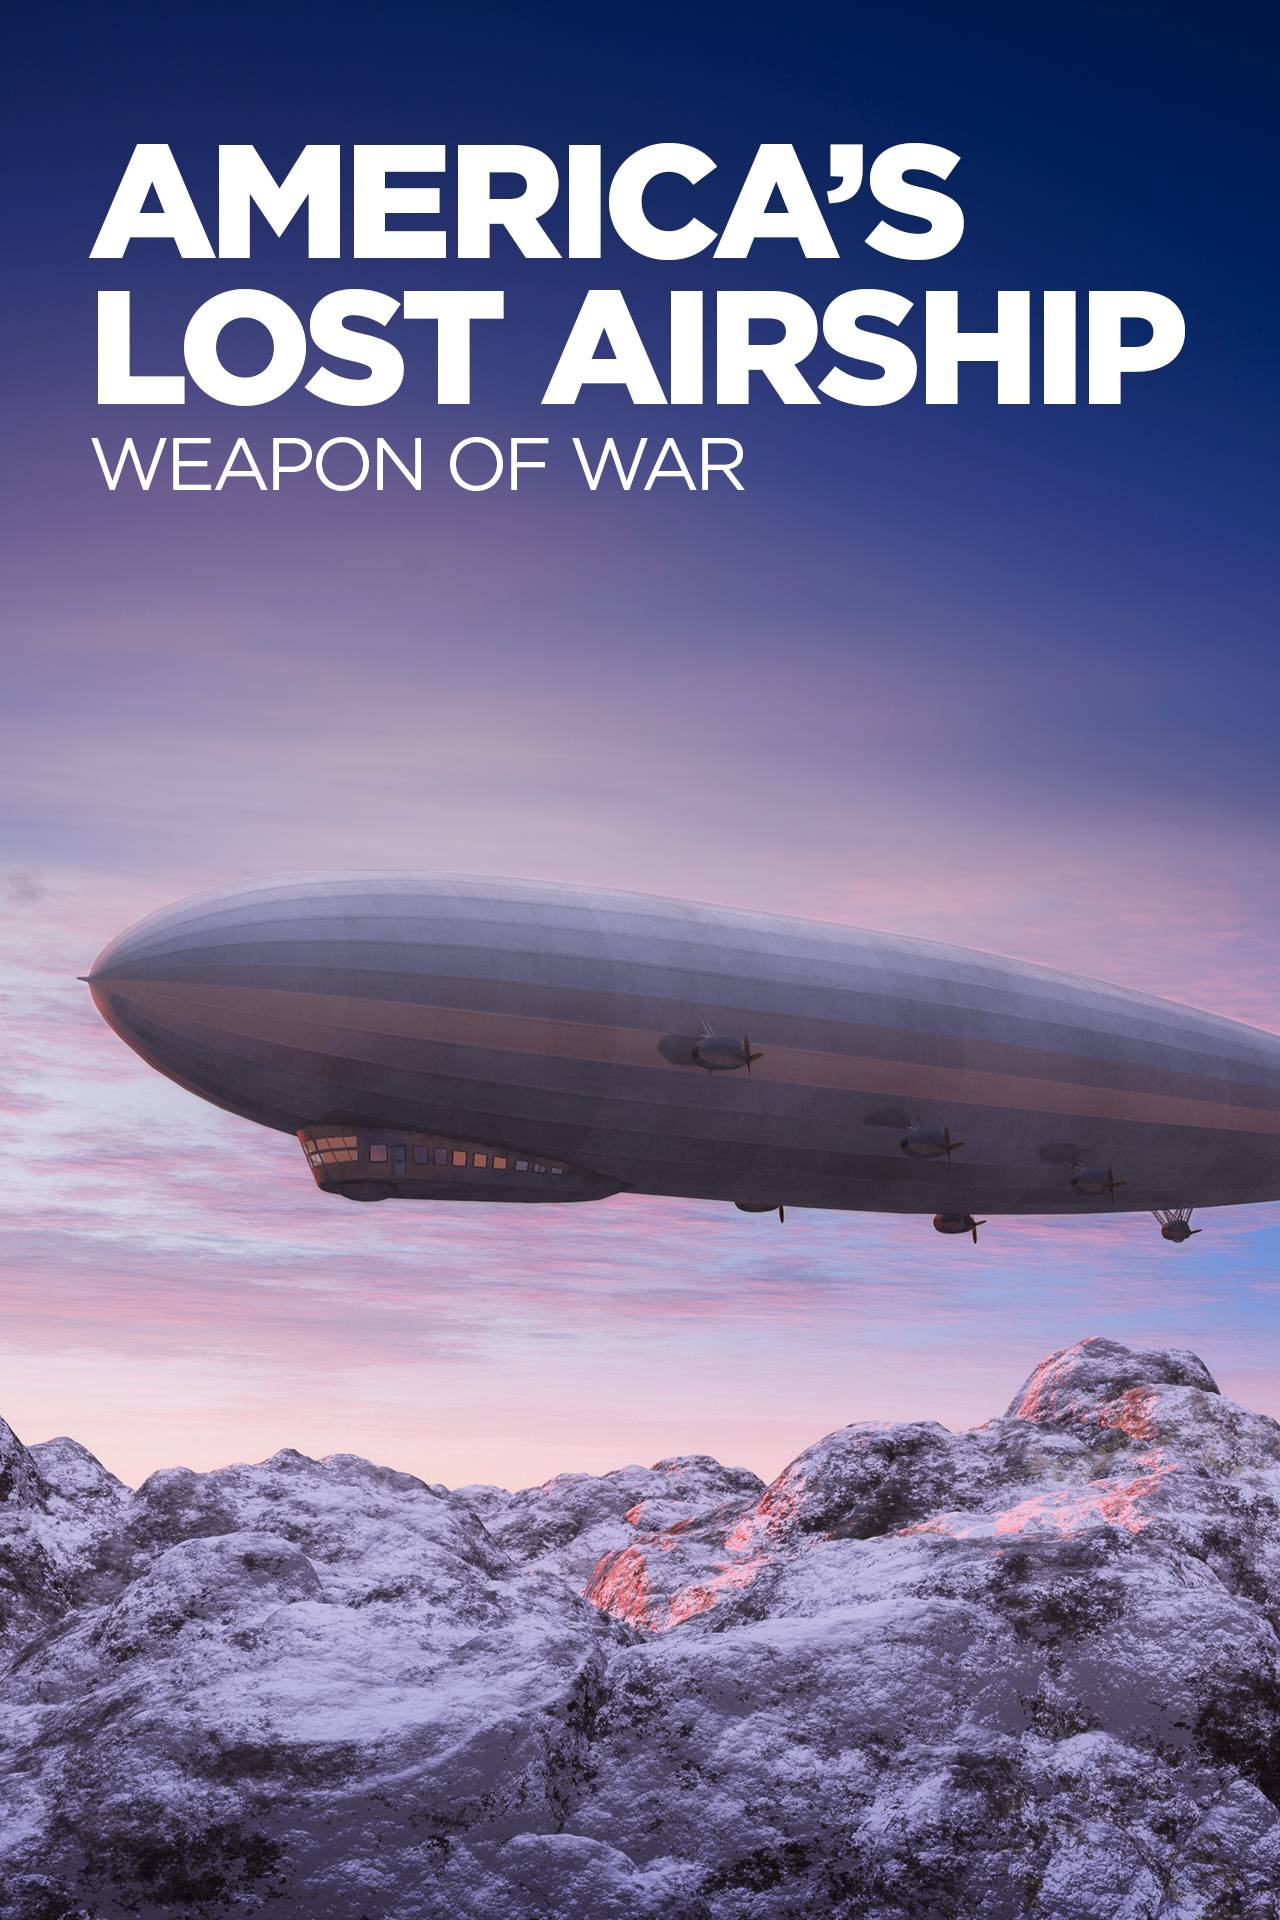 America's Lost Airship: Weapon of War